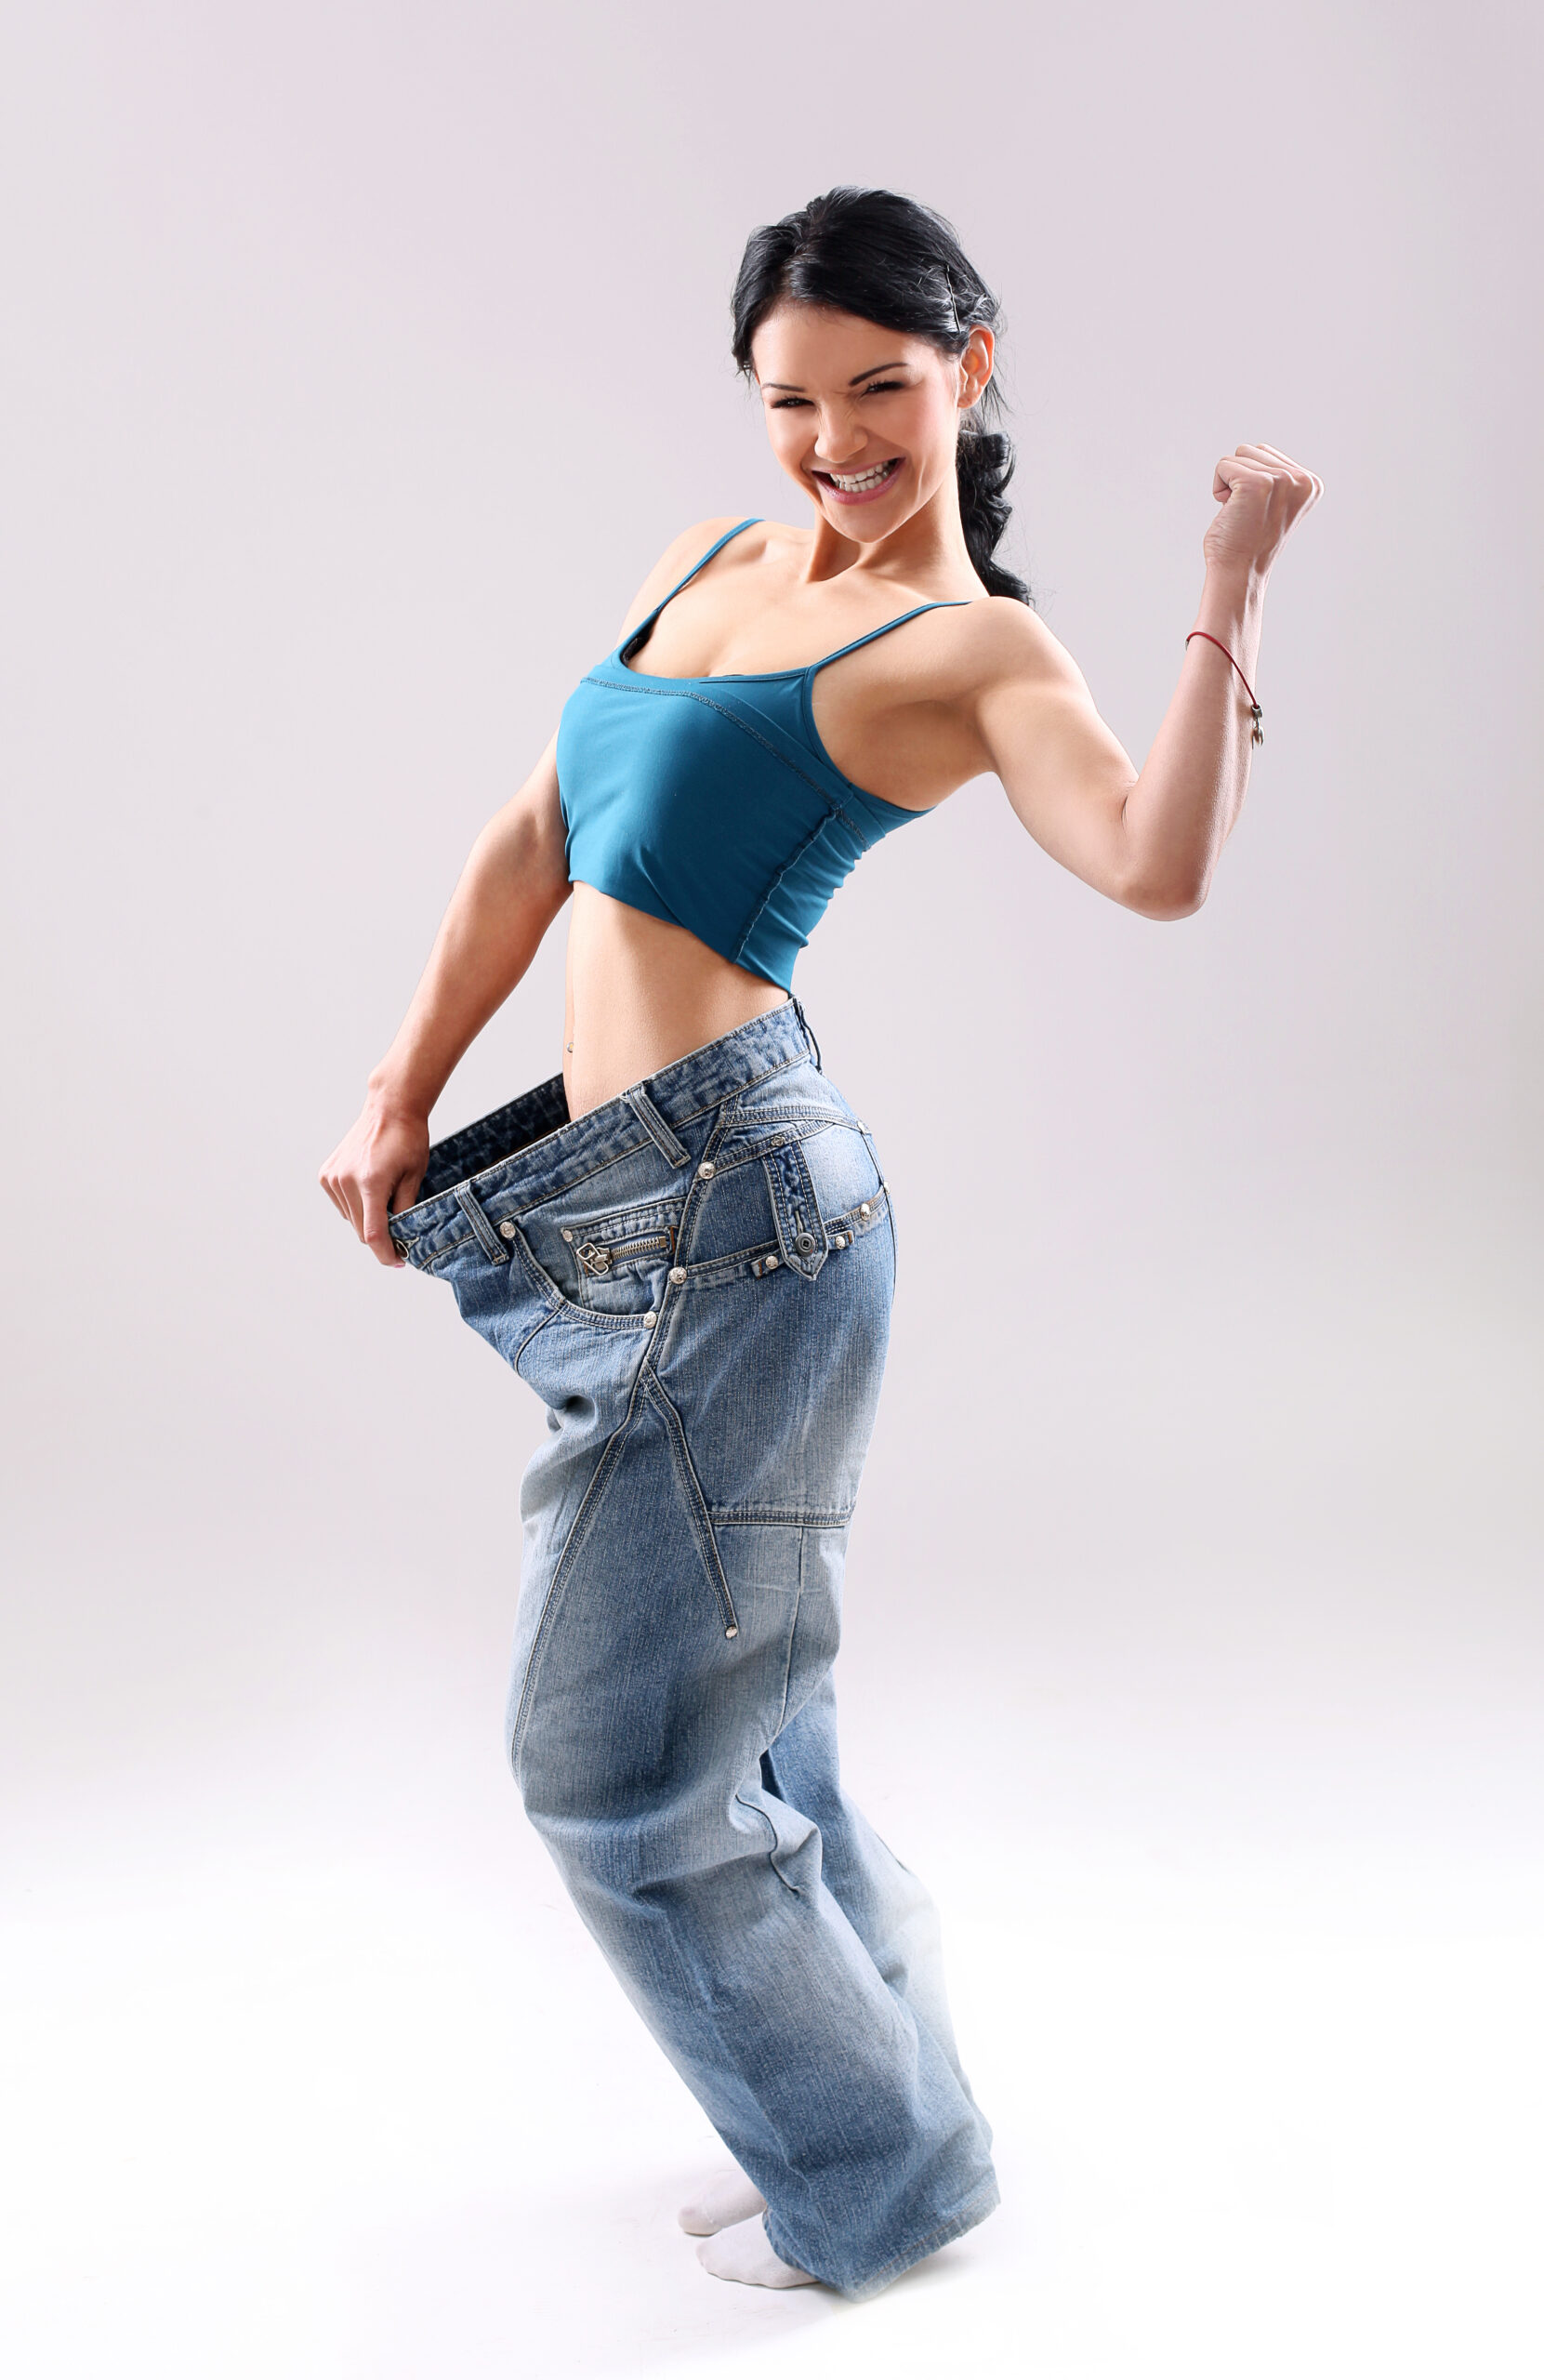 Breaking weight loss plateaus:Natural supplements for weight loss.